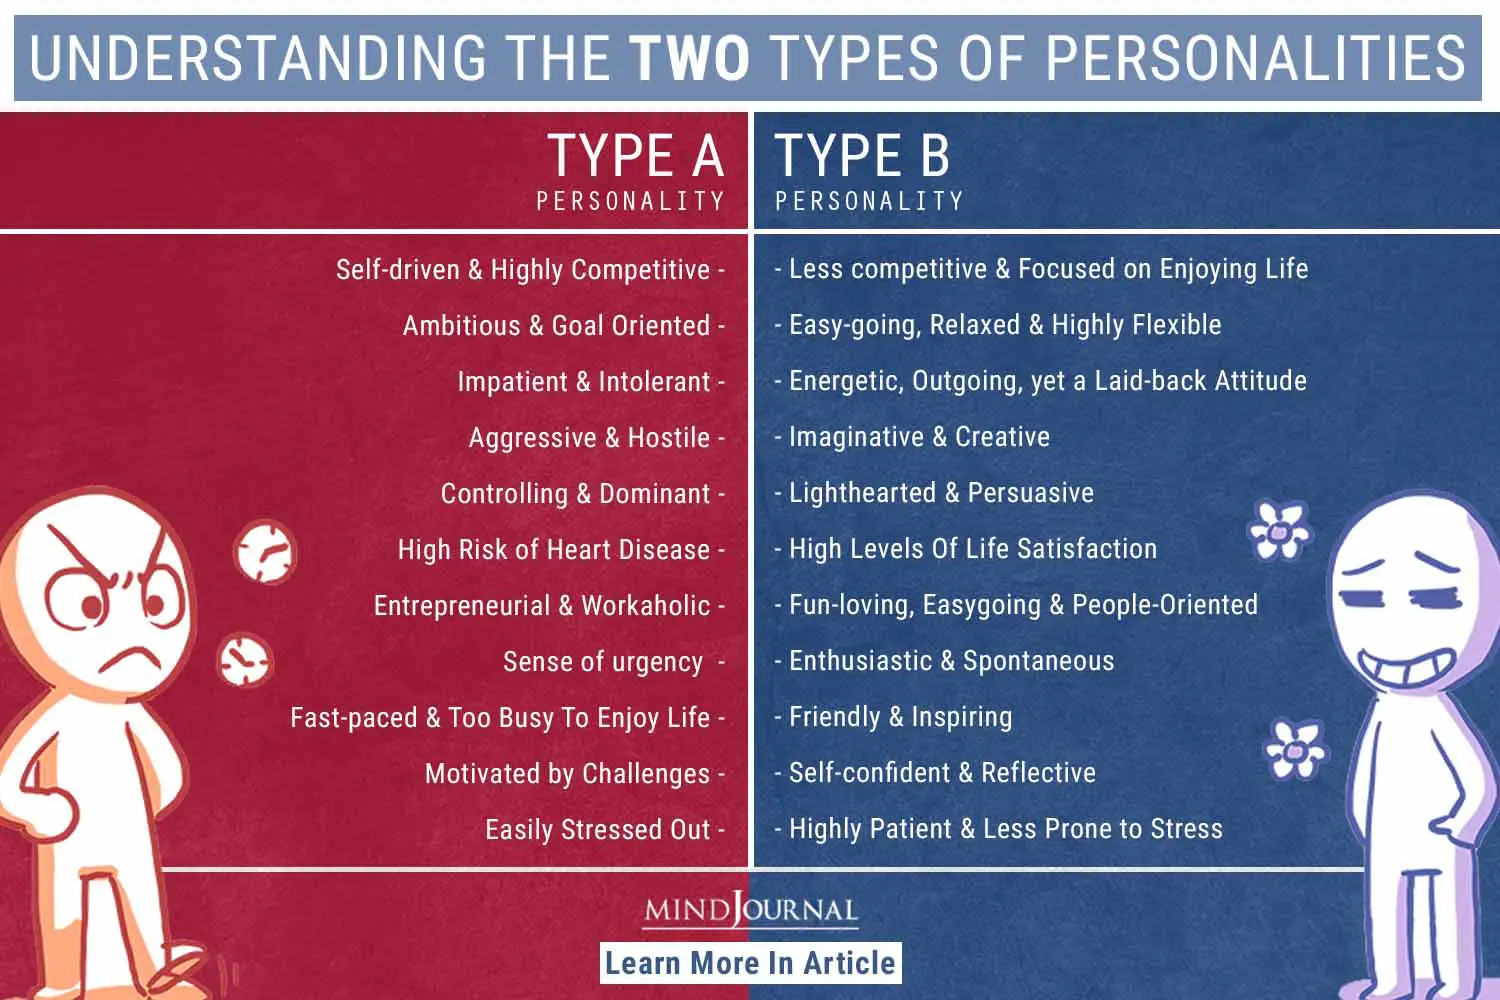 https://themindsjournal.com/wp-content/uploads/2020/07/Understanding-Type-A-And-Type-B-Personality-infographic.jpg.webp